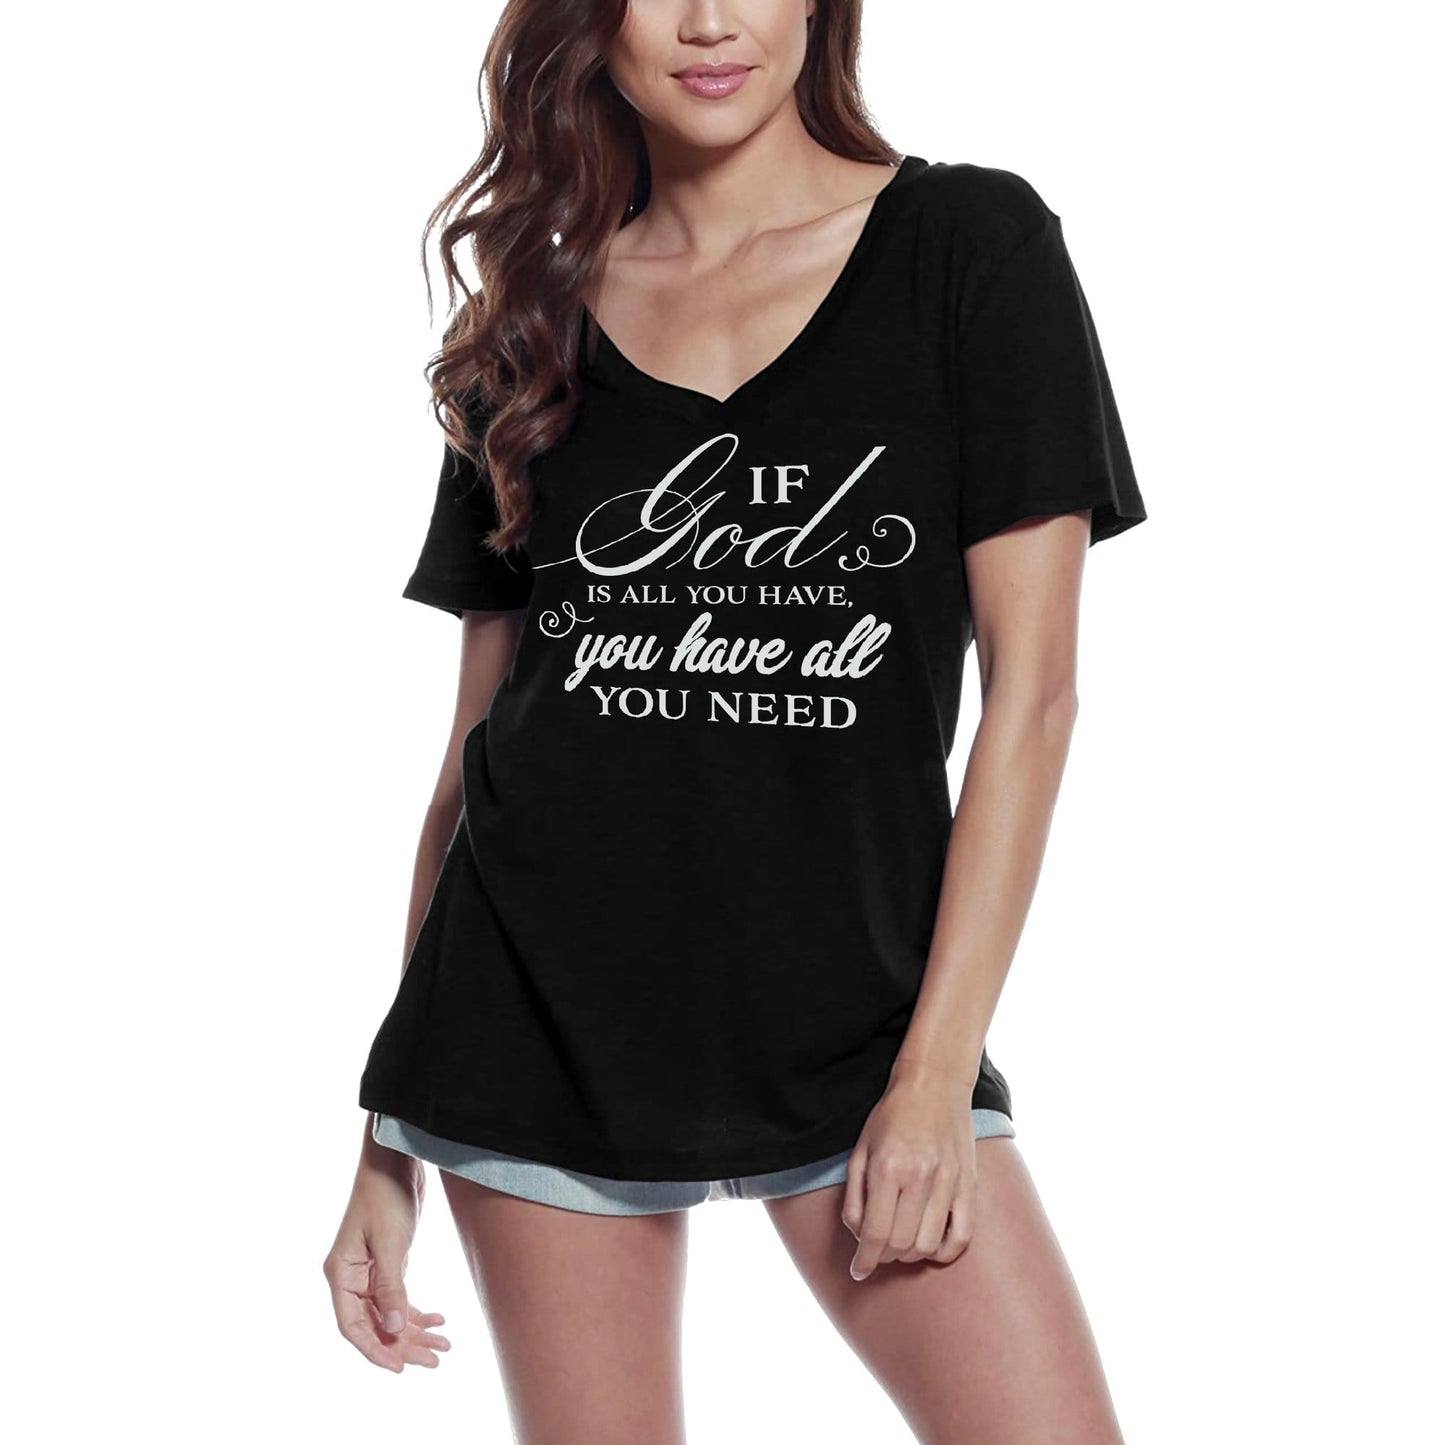 ULTRABASIC Women's T-Shirt If God Is All You Have You Have All You Need - Religious Motivational Quote